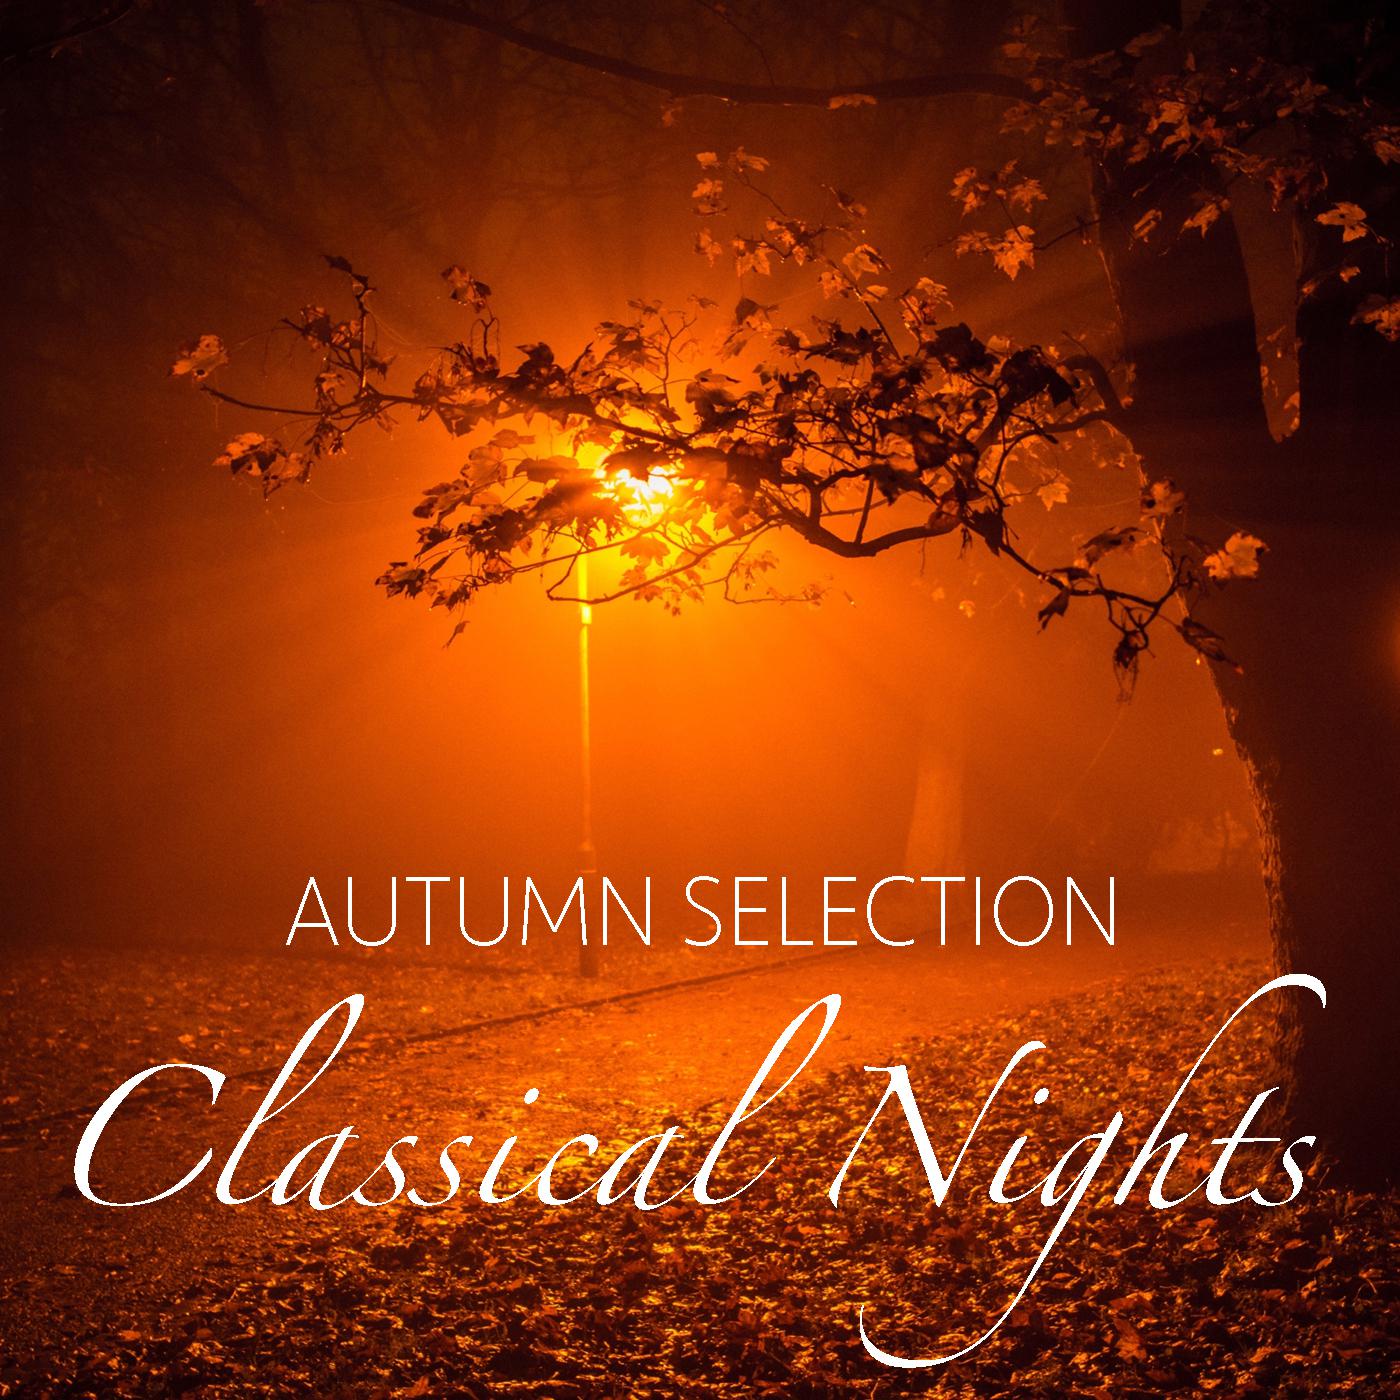 Classical Nights Autumn Selection